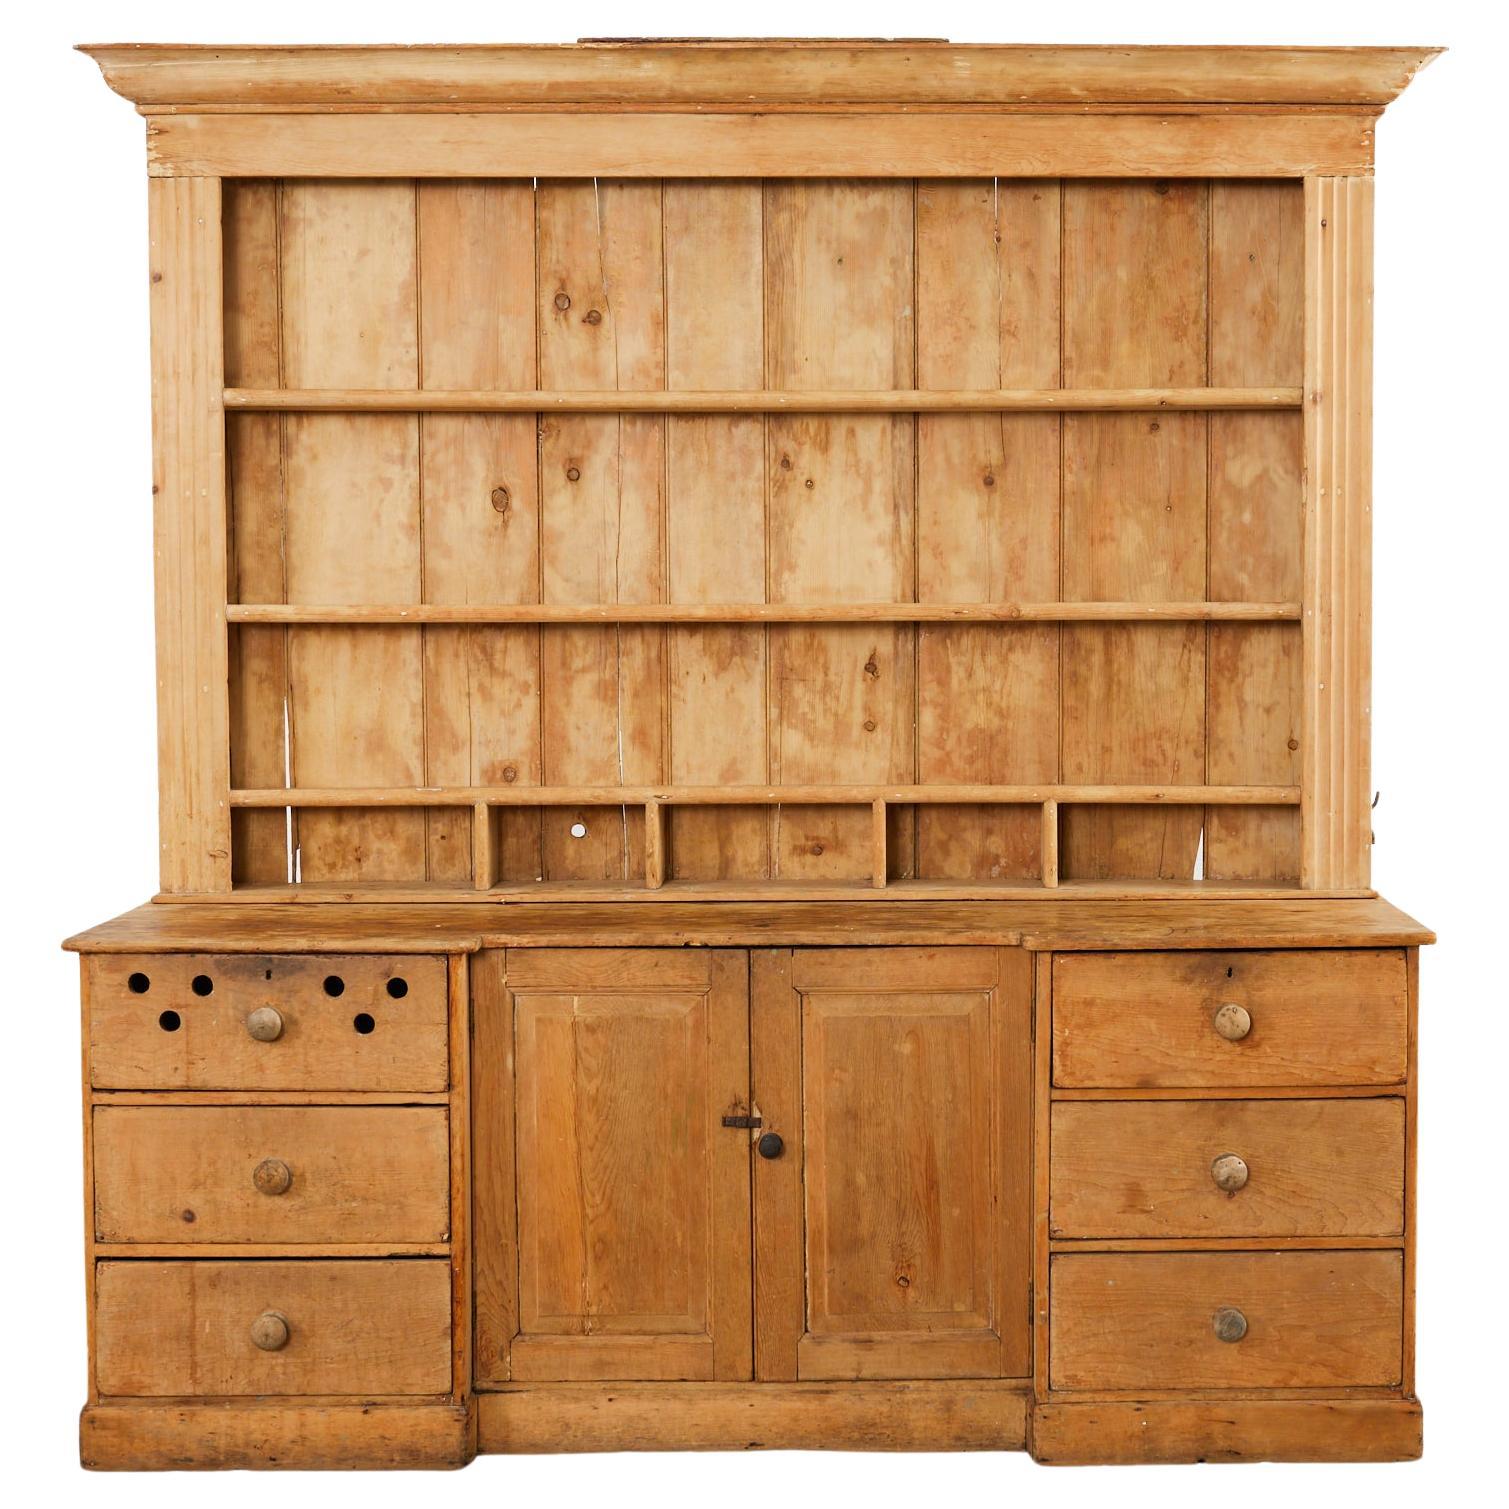 18th Century French Provincial Pine Farmhouse Dresser with Cupboard For Sale